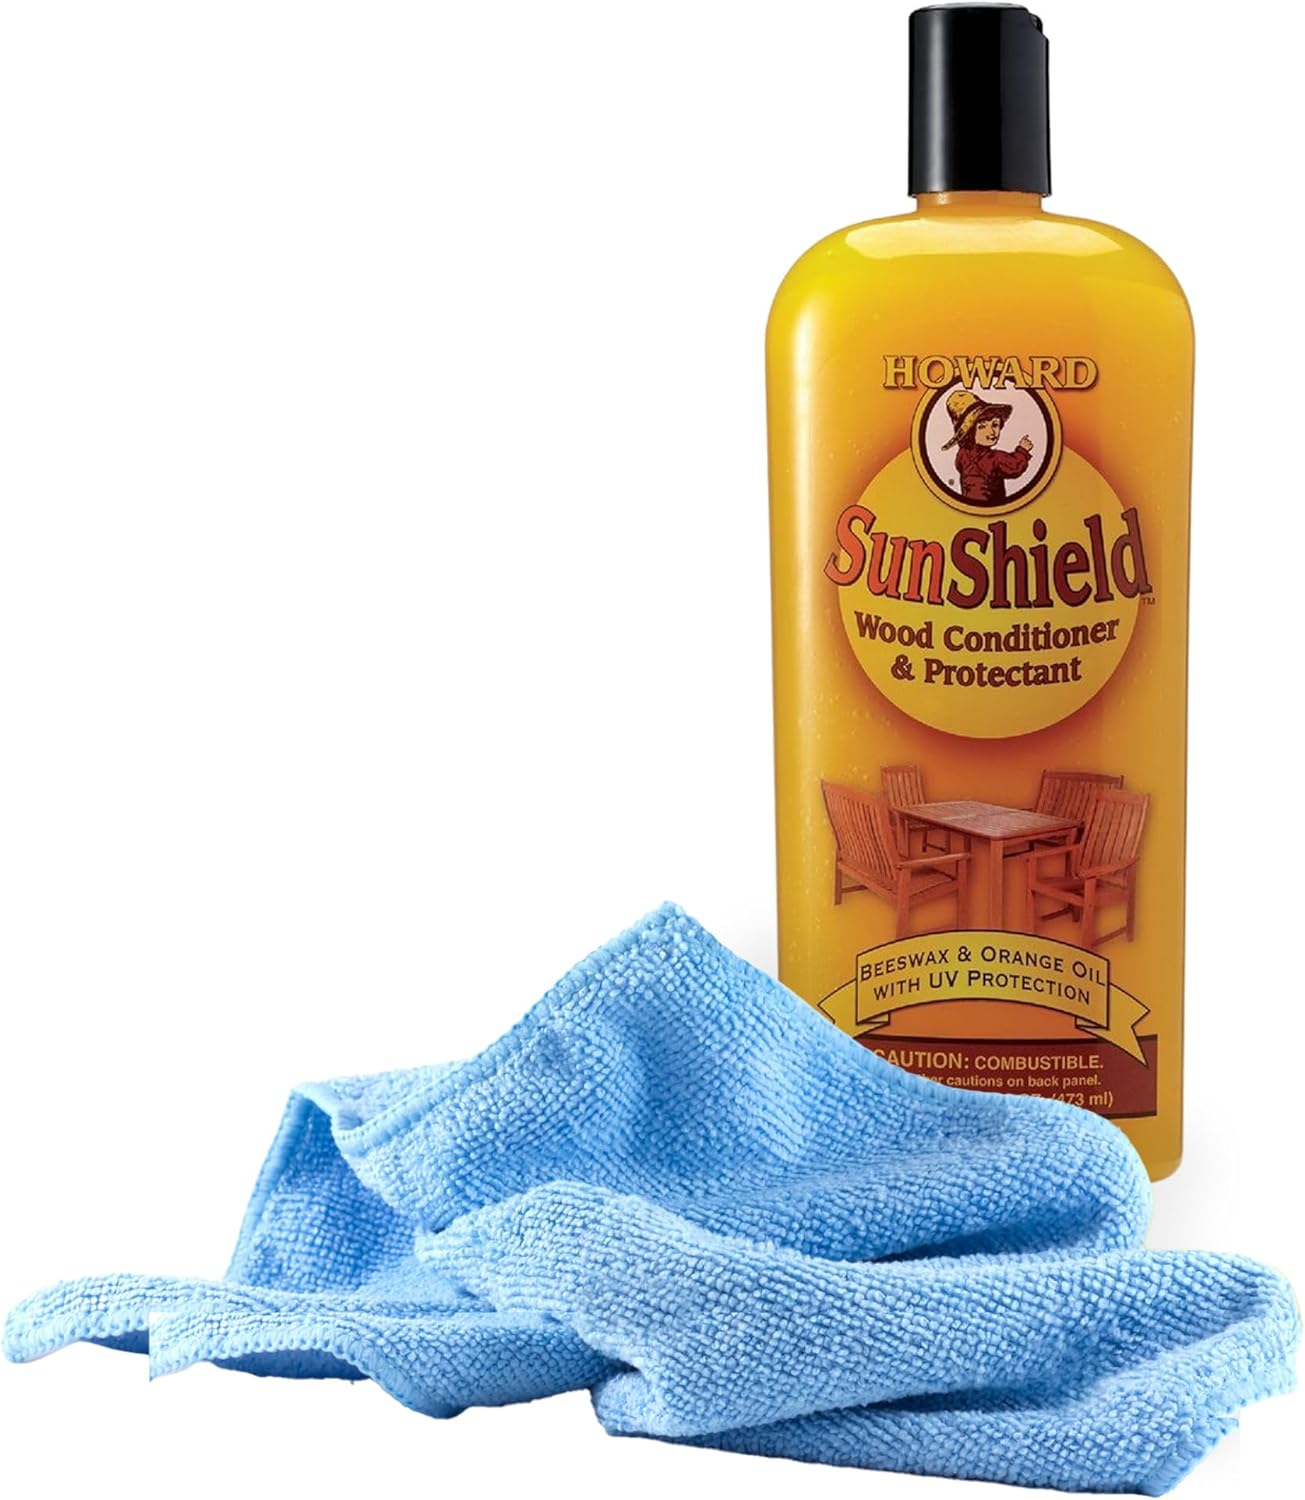 Black Swan Distributors - Howard SunShield Wood Conditioner & Protectant (16 oz) & Non-Abrasive, Washable Microfiber Cleaning Cloth (15x15 in) - Beeswax & Orange Oil - For Any Wood Surface